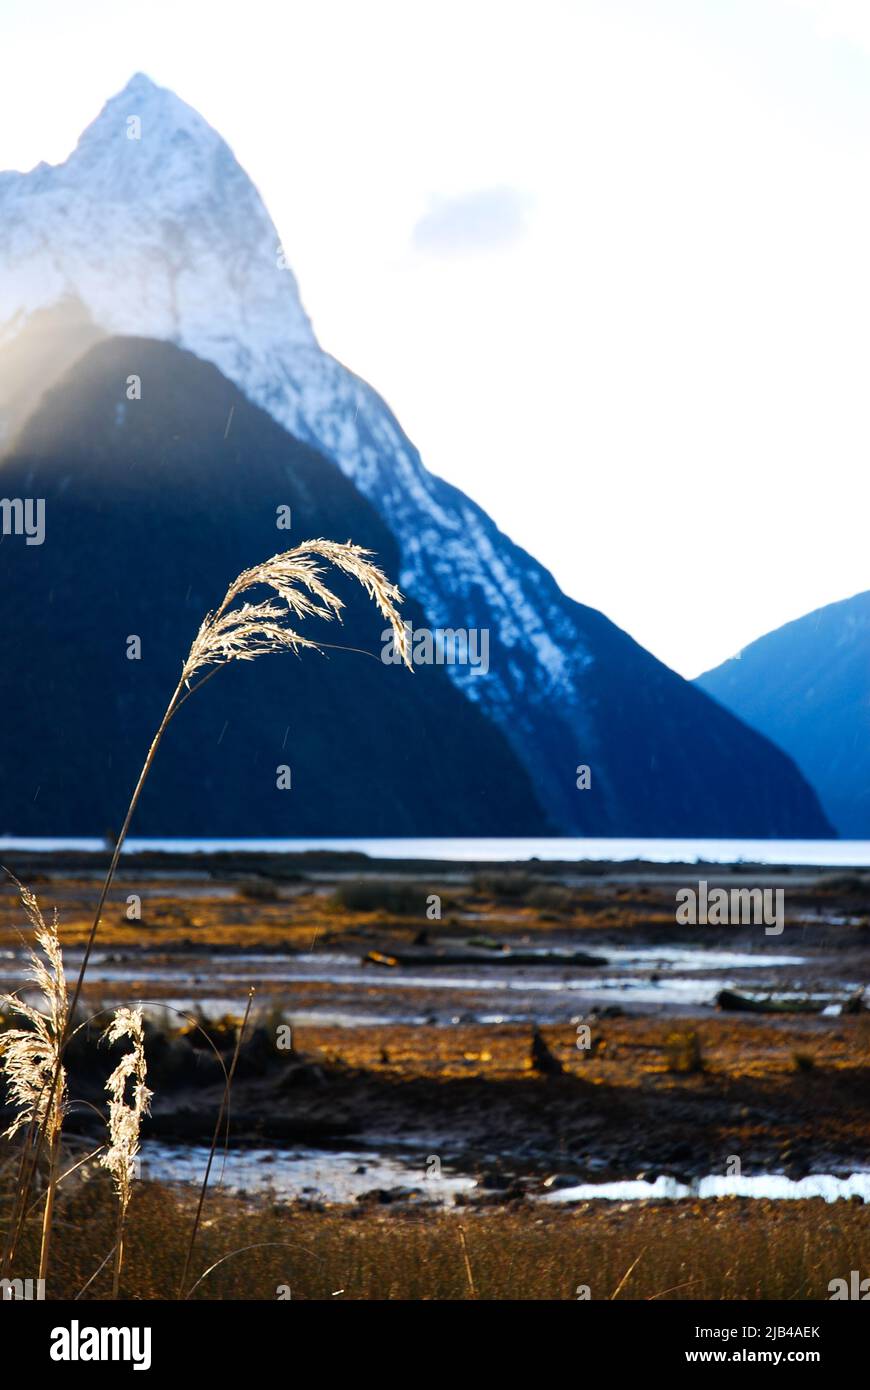 Toi toi plant highlighted in Milford Sounds water view sunset snowcapped volcano in South Island of New Zealand Aotearoa Stock Photo